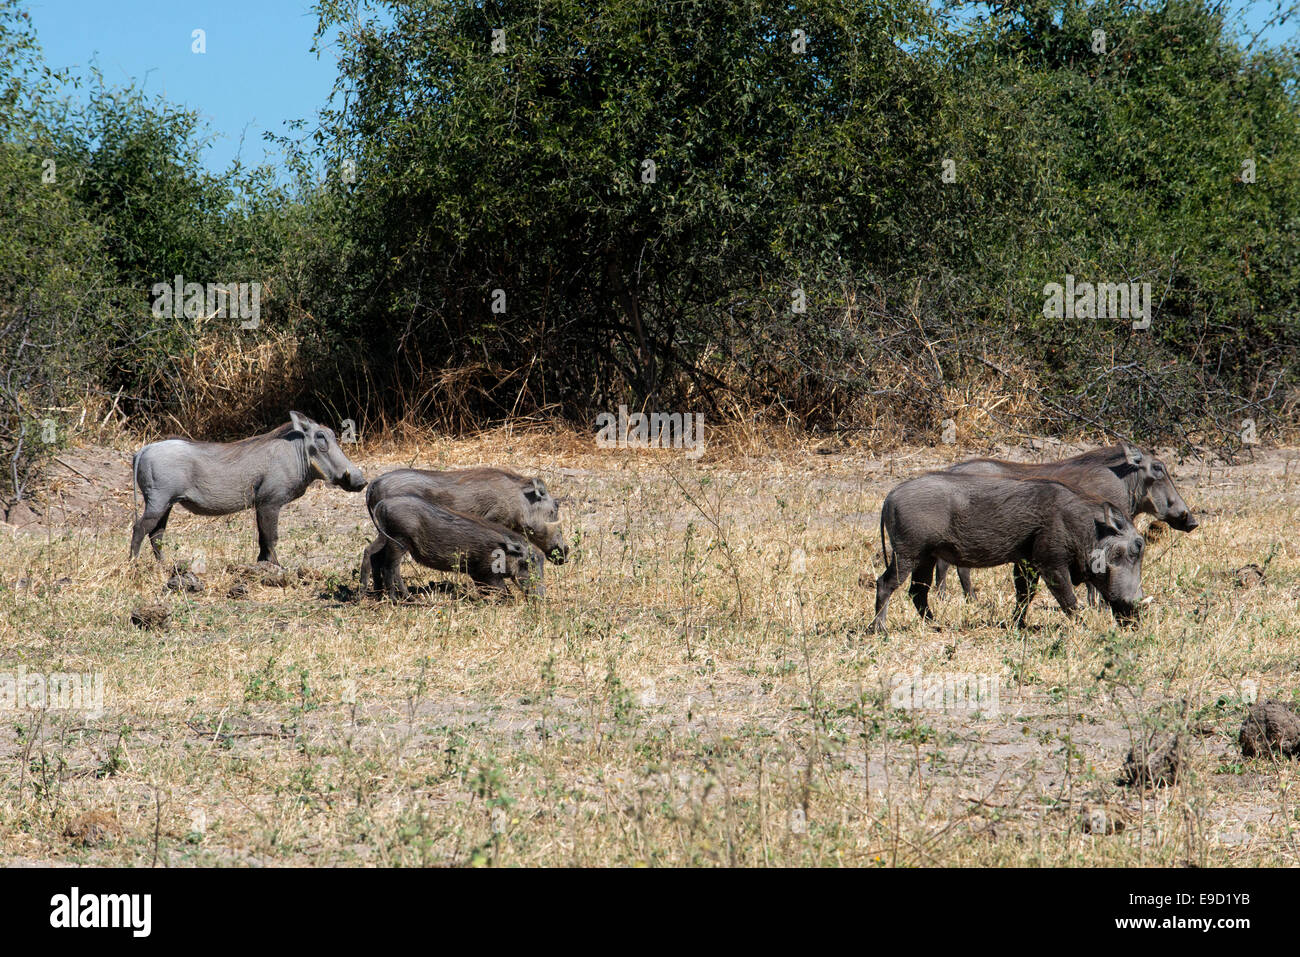 From Victoria Falls is possible to visit the nearby Botswana. Specifically Chobe National Park.  A warthog crossing the road nea Stock Photo